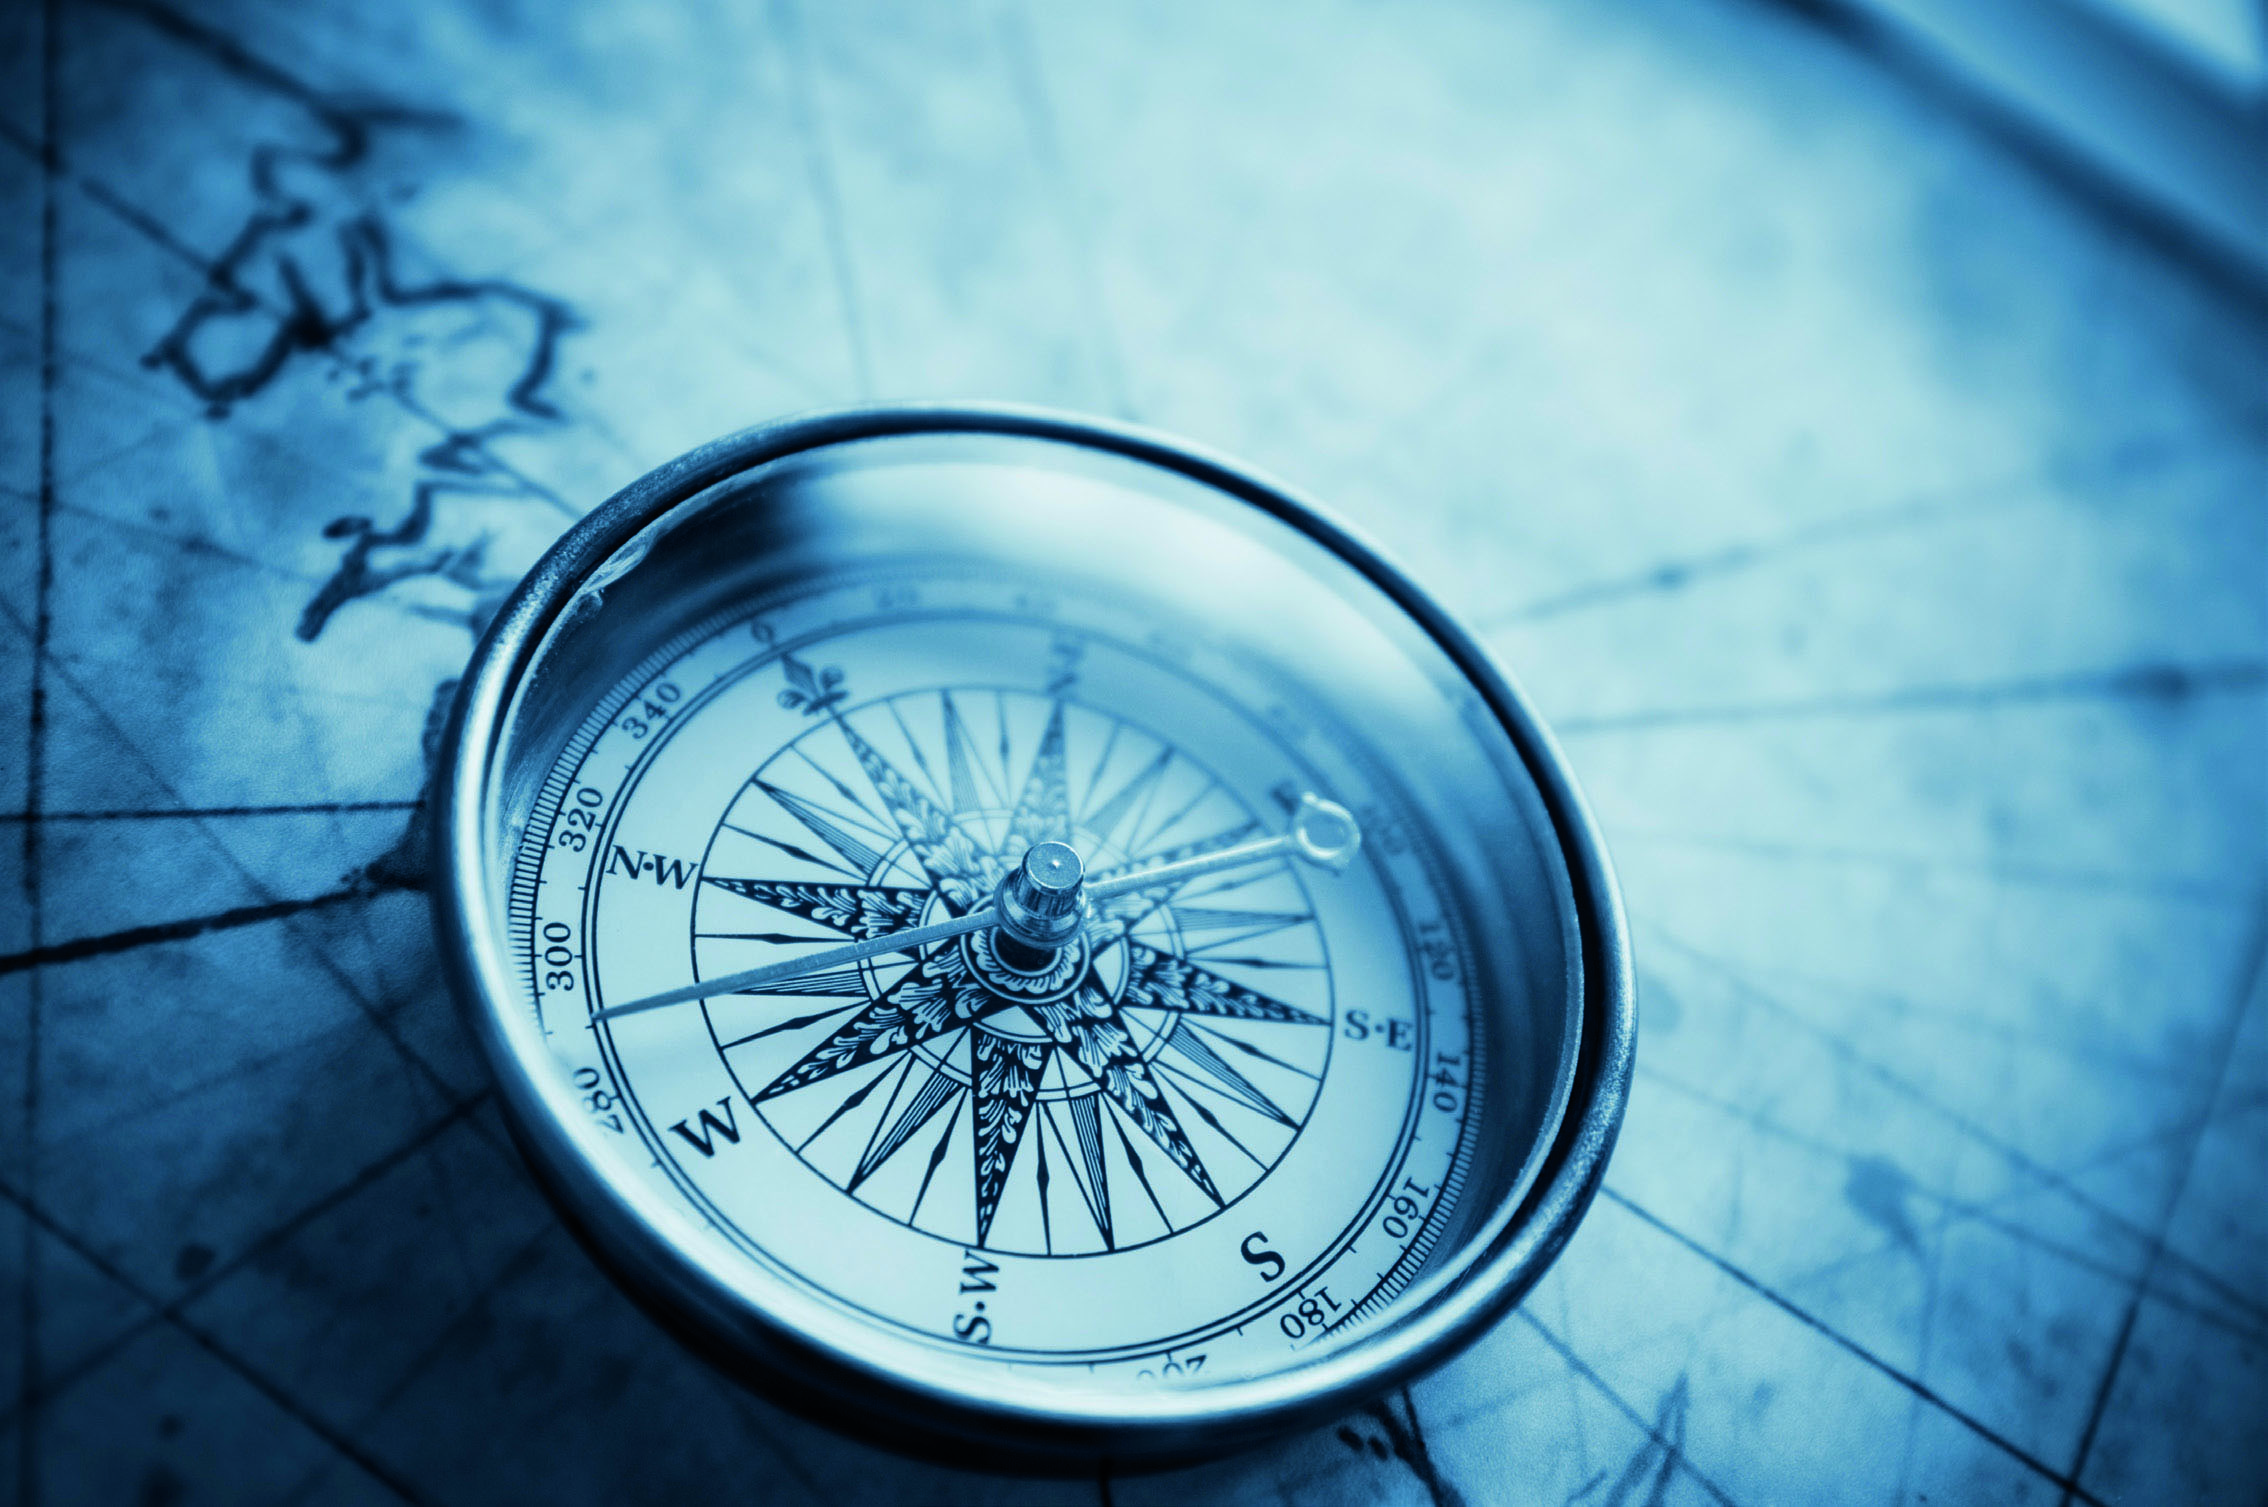 Compass on old map with blue tone.